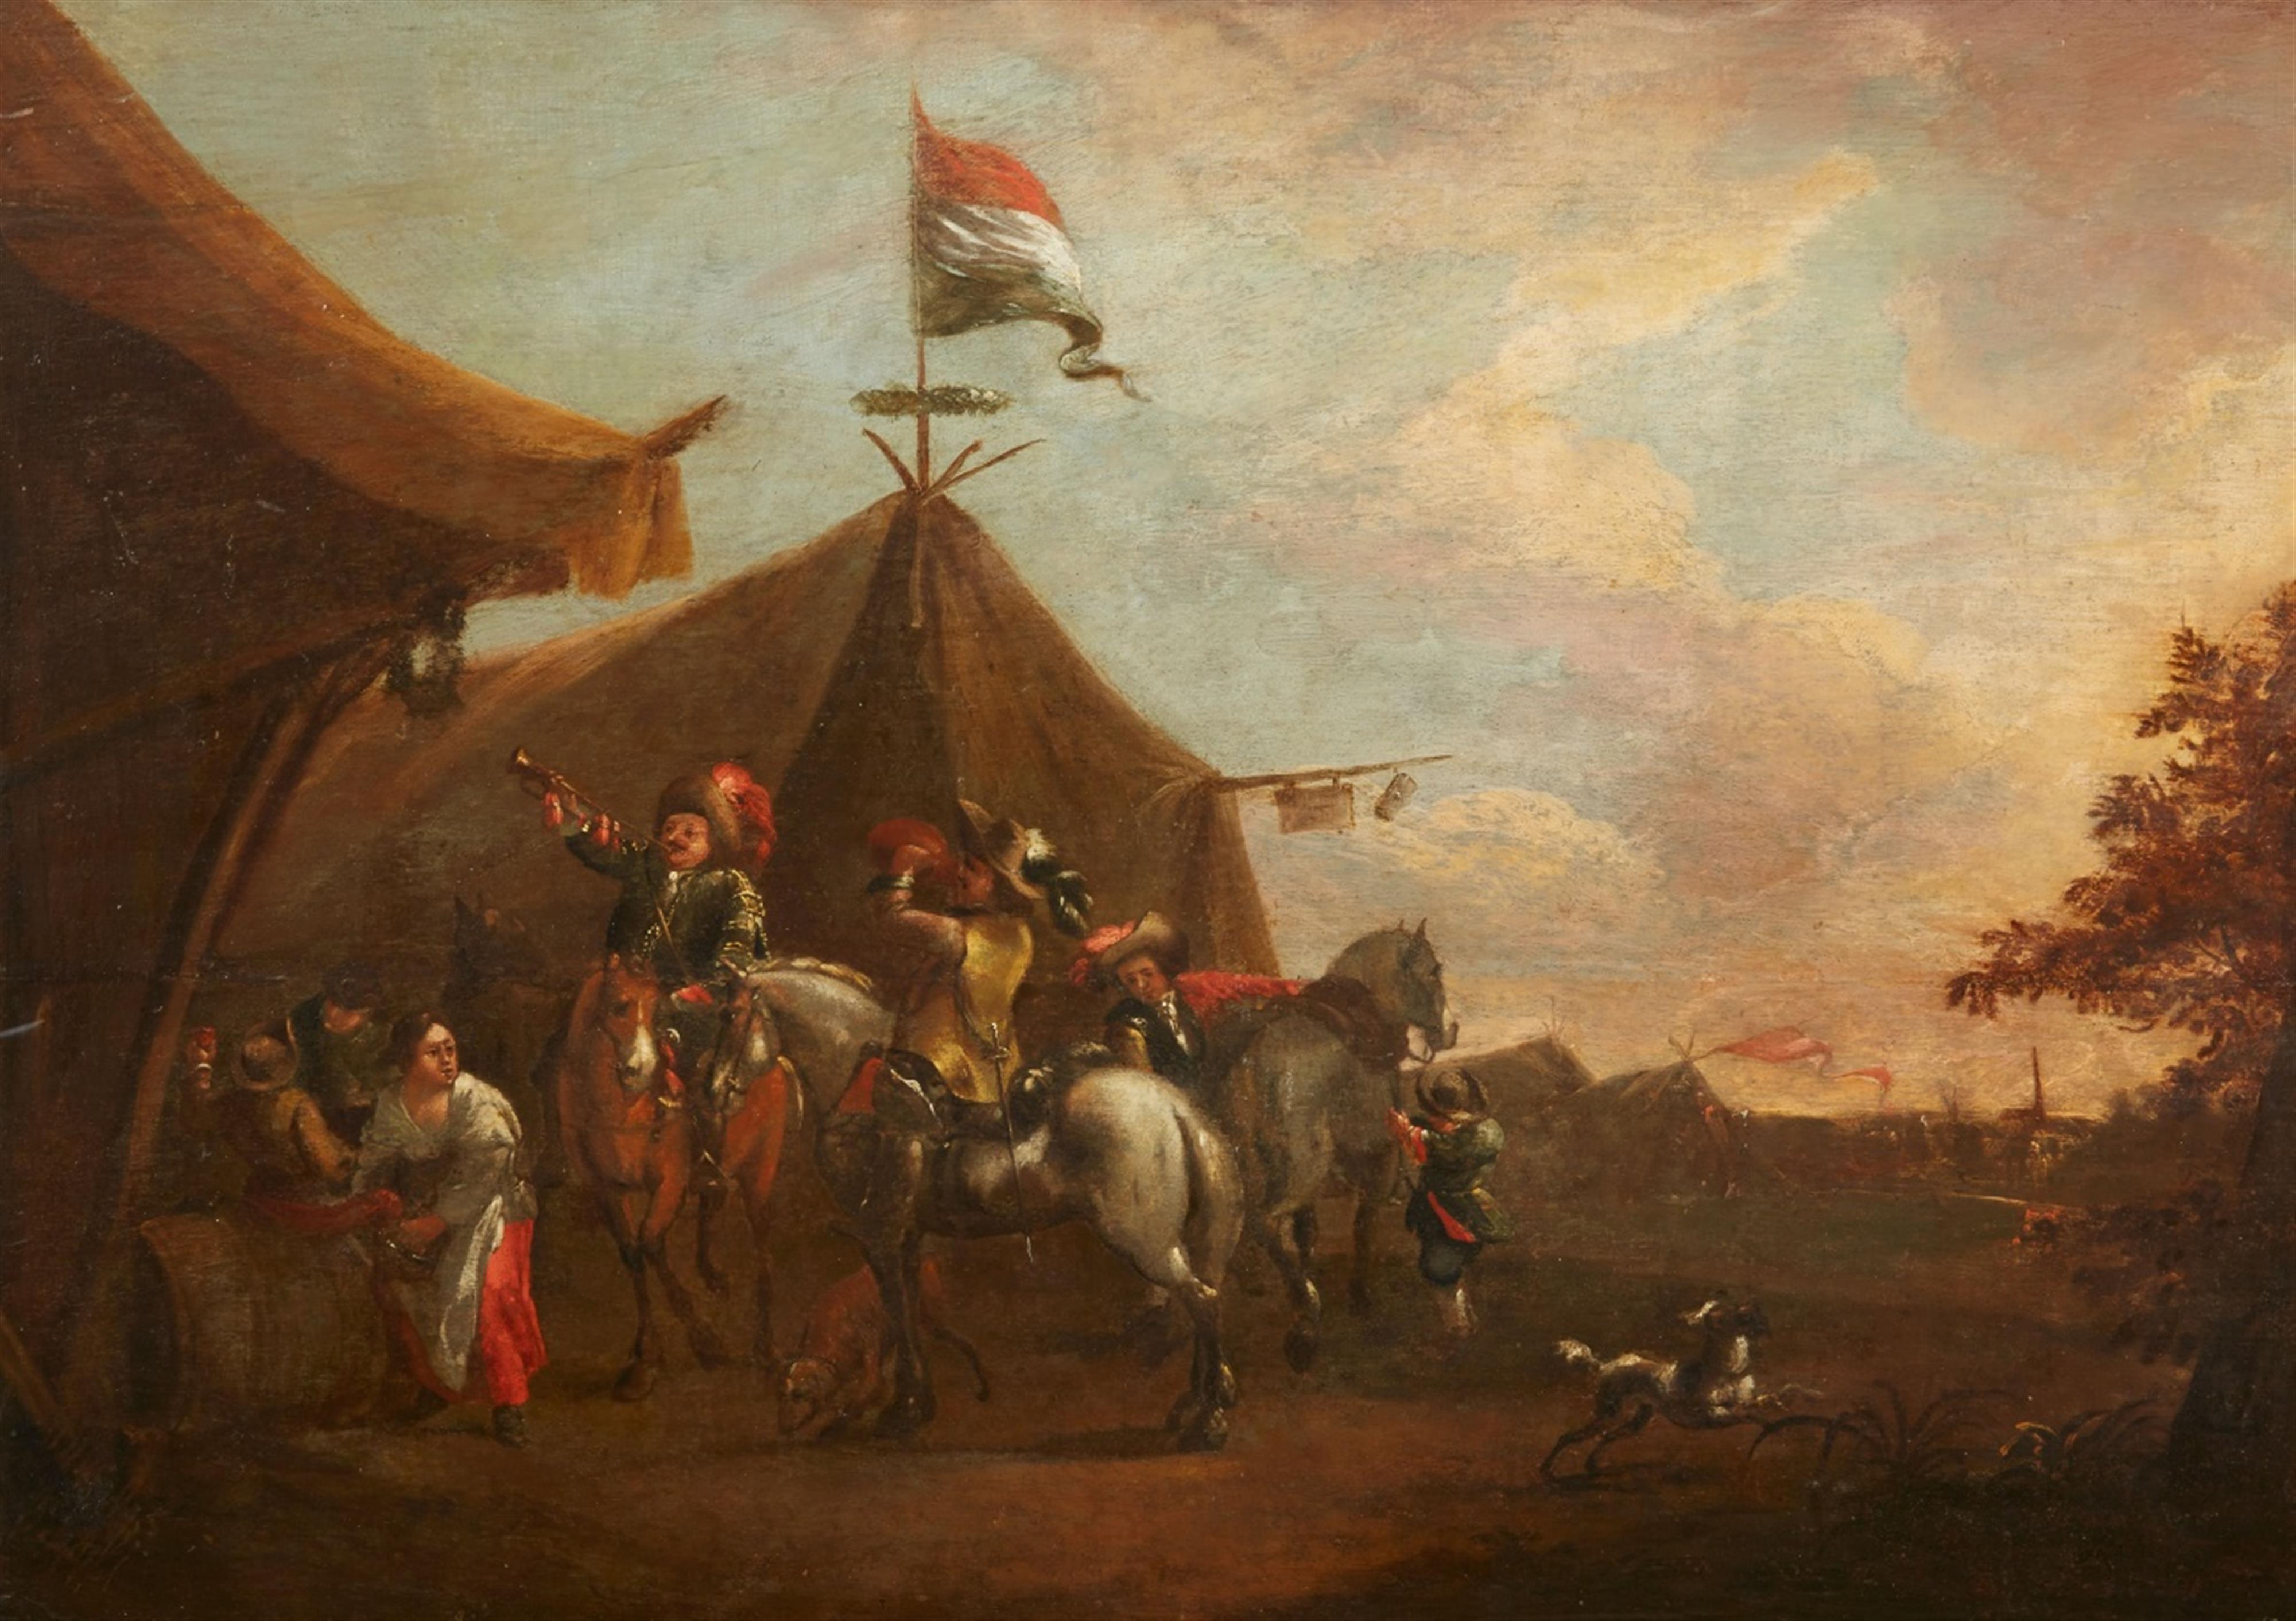 Dirck Stoop, attributed to - Cavalrymen by a Tent - image-1